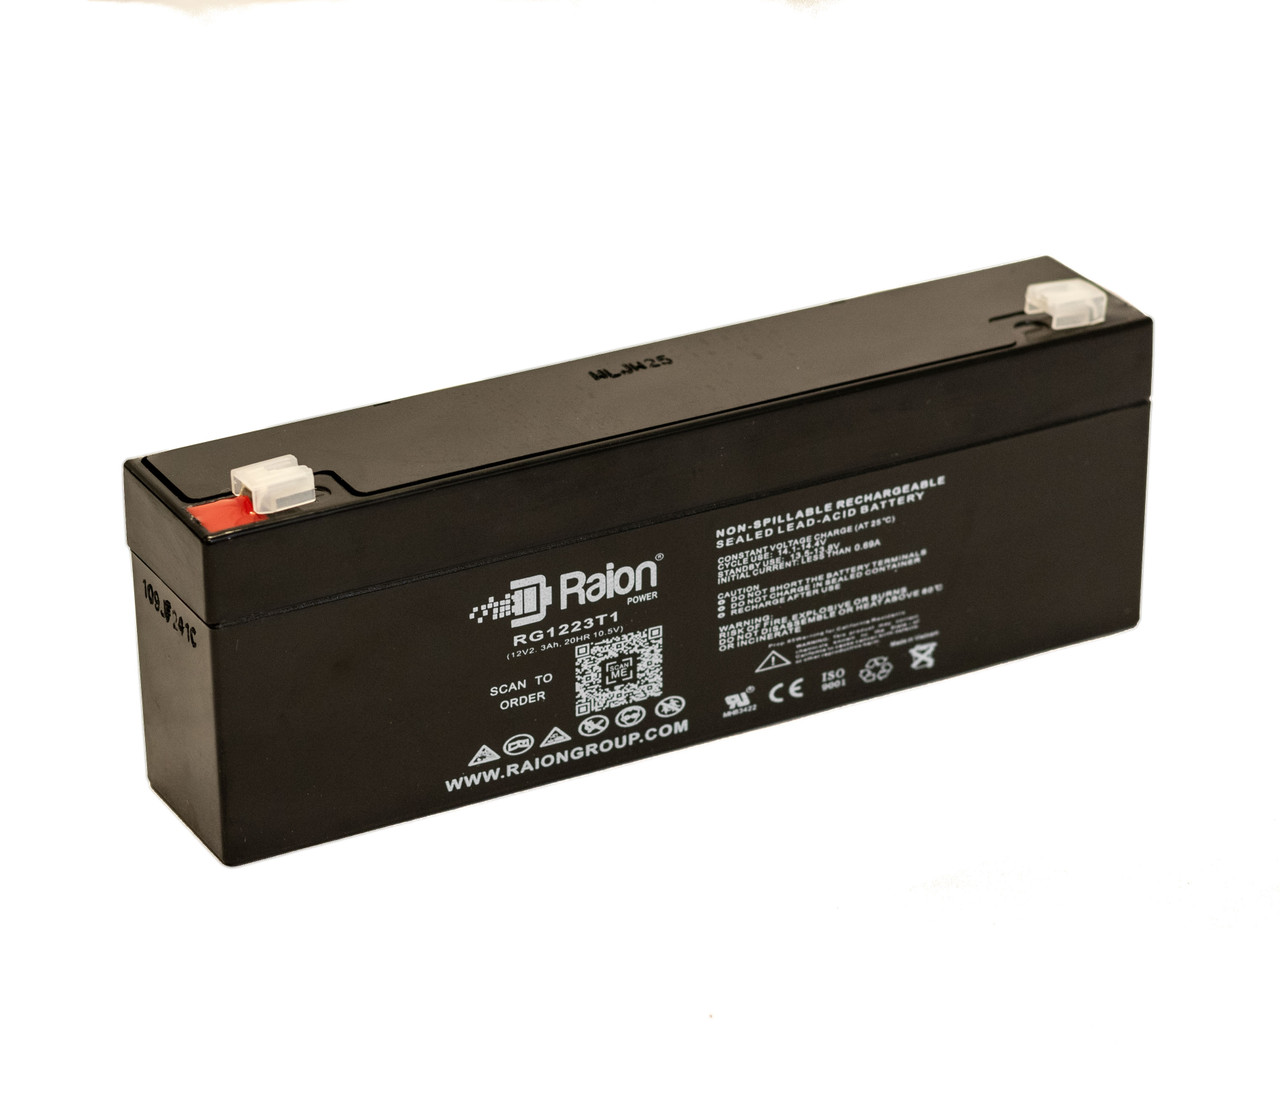 Raion Power RG1223T1 Replacement Battery for MK B00886